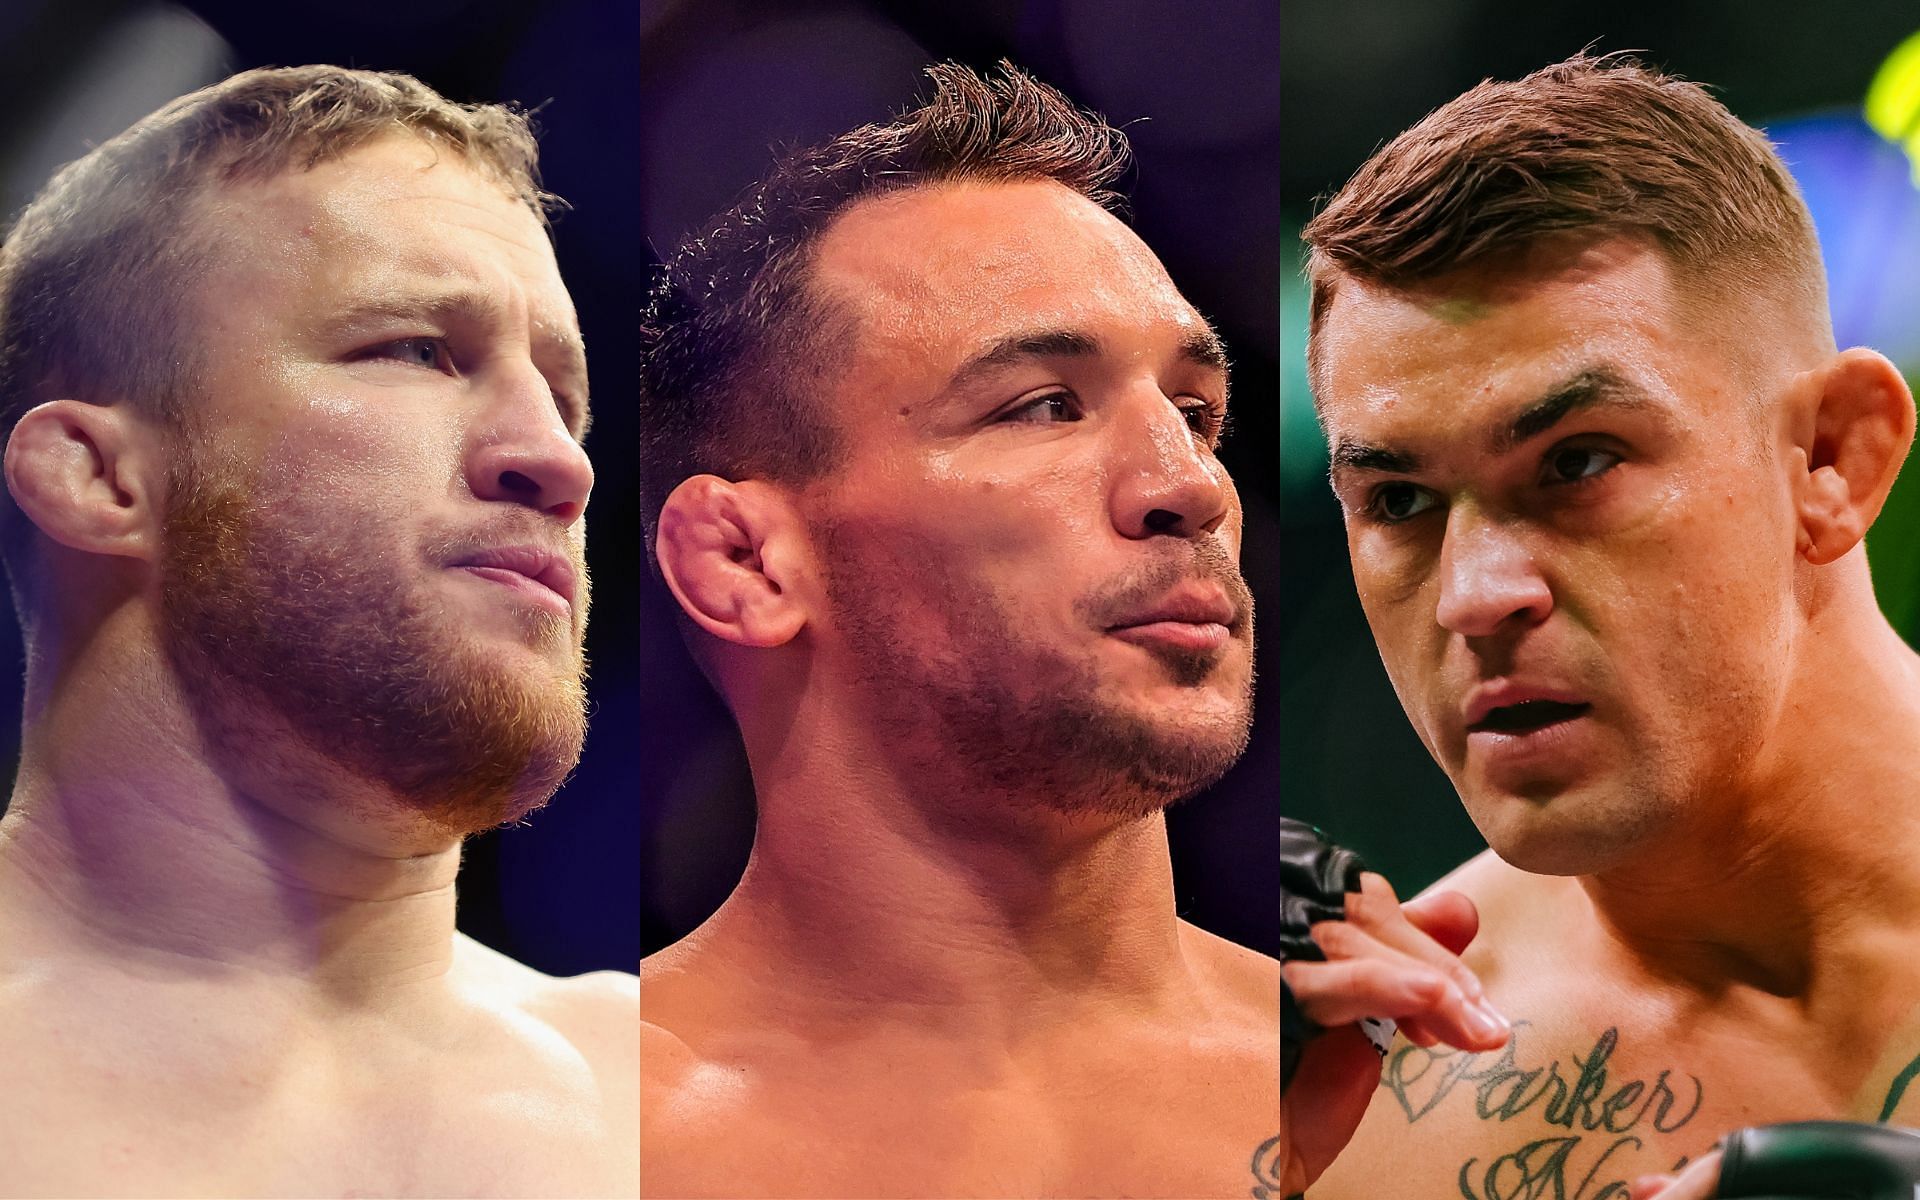 Justin Gaethje (Left), Michael Chandler (Middle), and Dustin Poirier (Right)